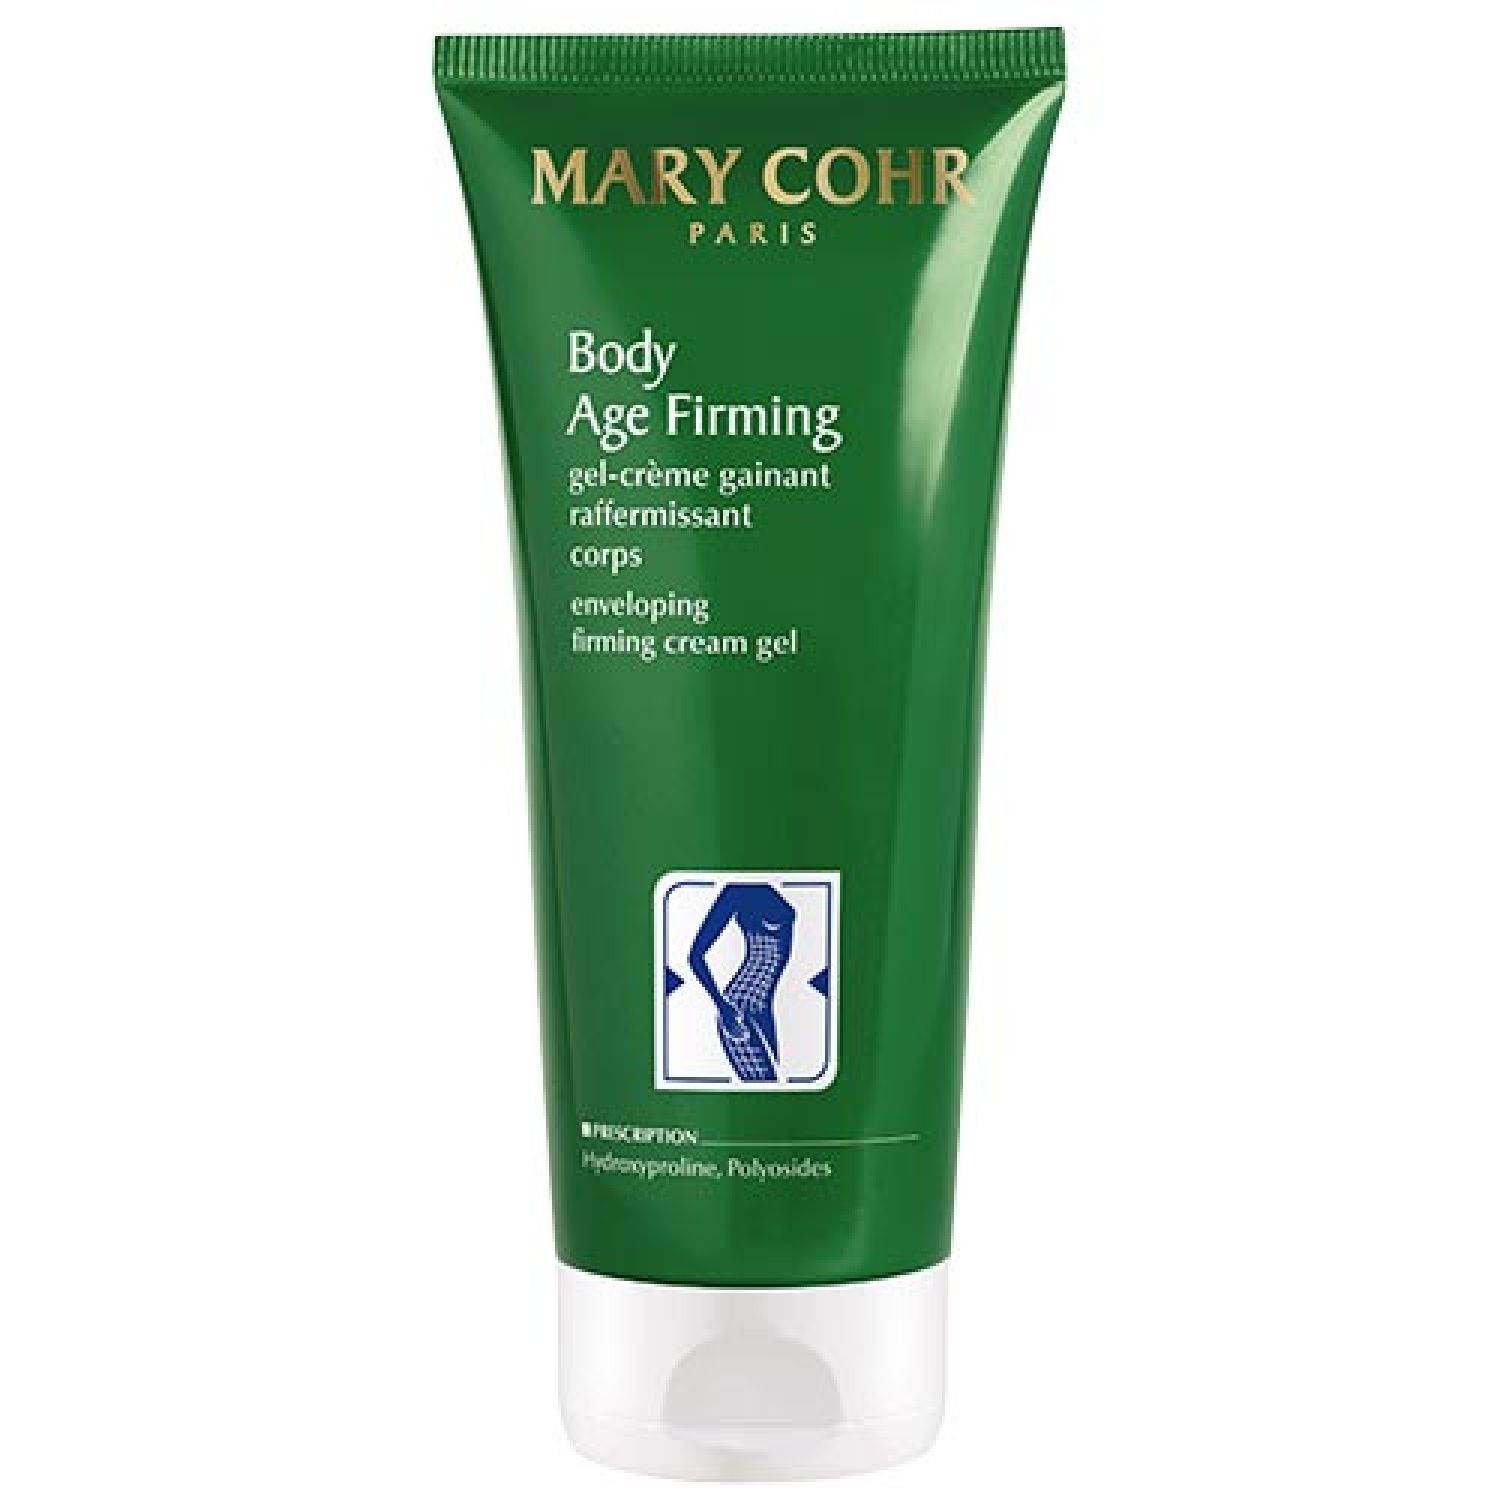 Mary Cohr Paris Corps Body Age Firming